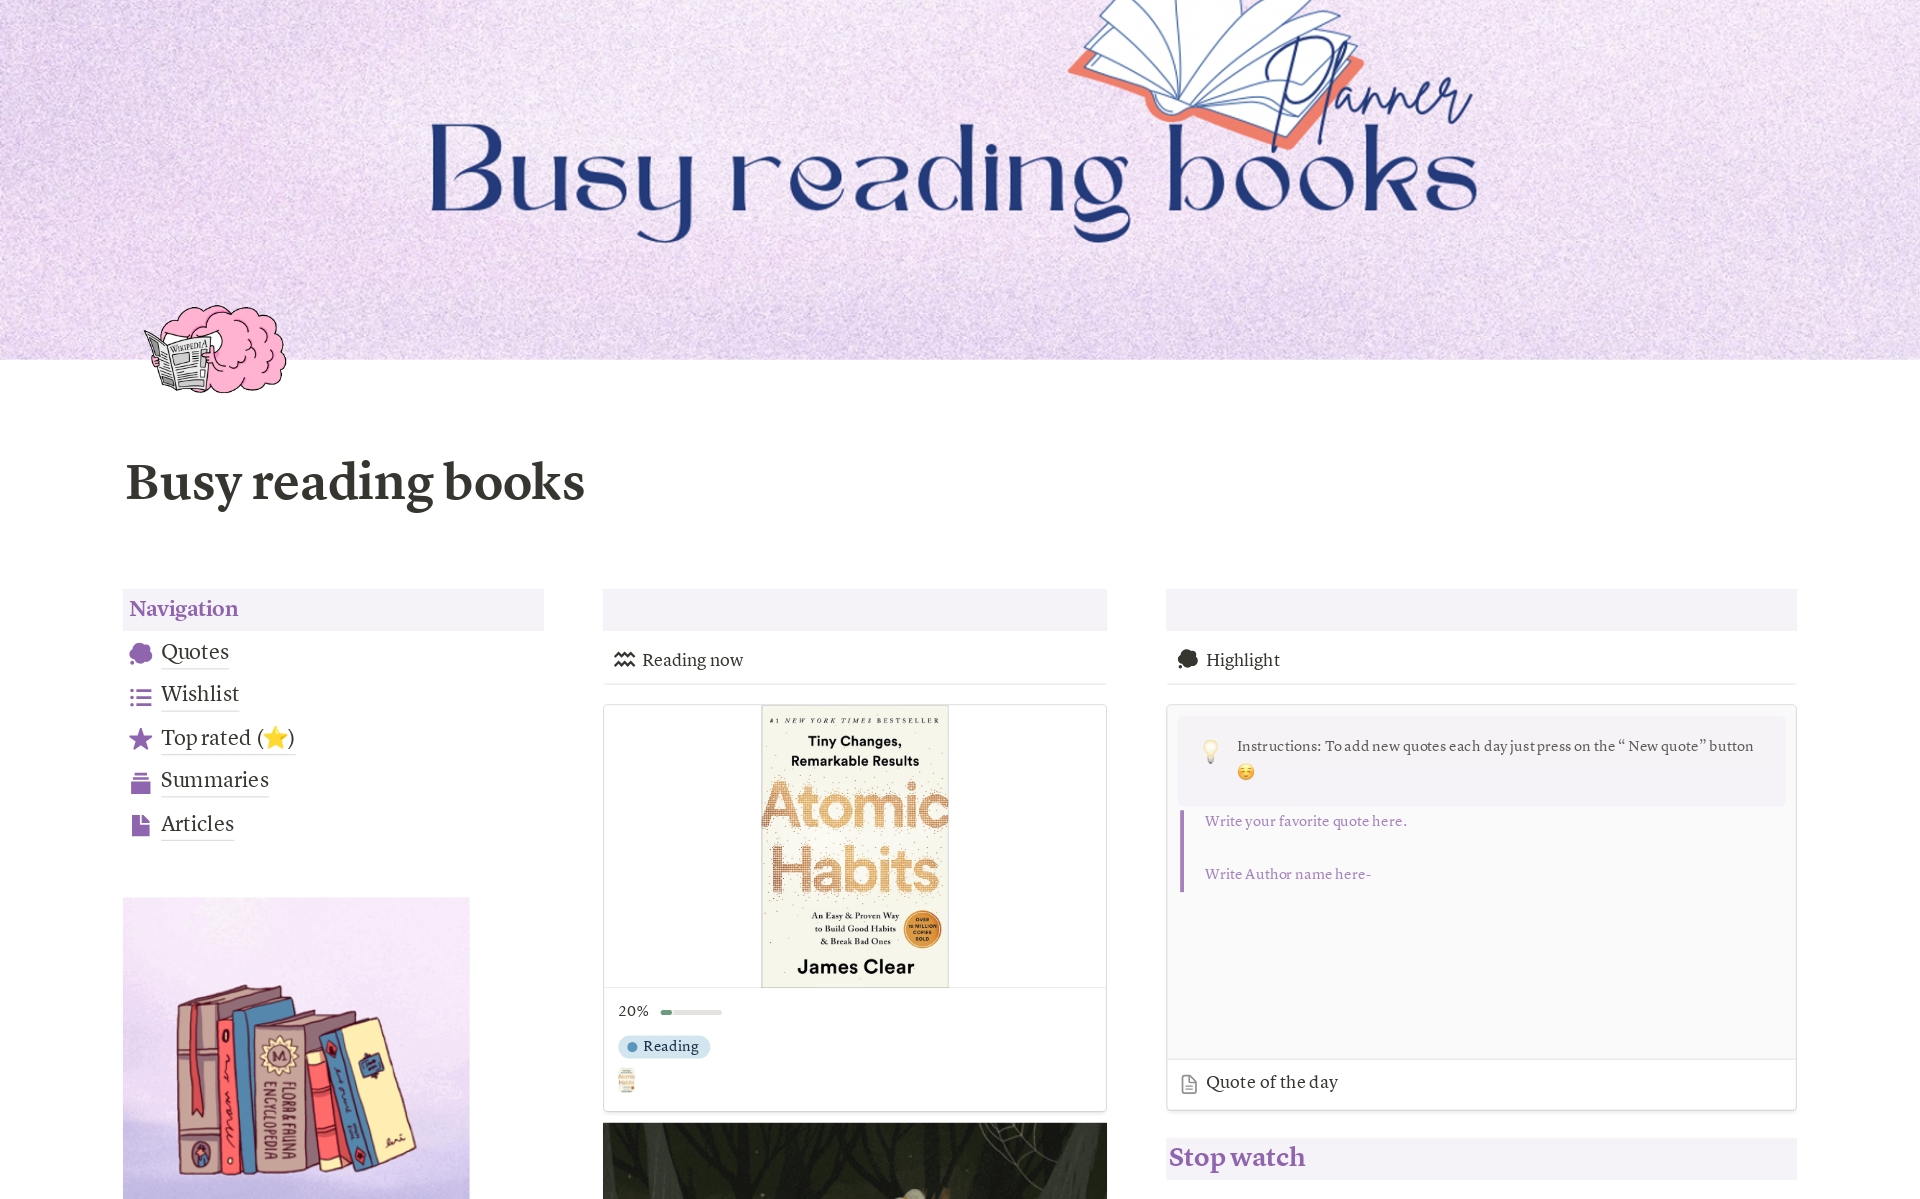 Welcome to “Royal but cool planners”
Embrace a more organized and enriched reading experience with our "Busy Reading Books" Notion template! This all-in-one tool allows you to keep track of your current reads, plan for future ones, and even write your own summaries. 